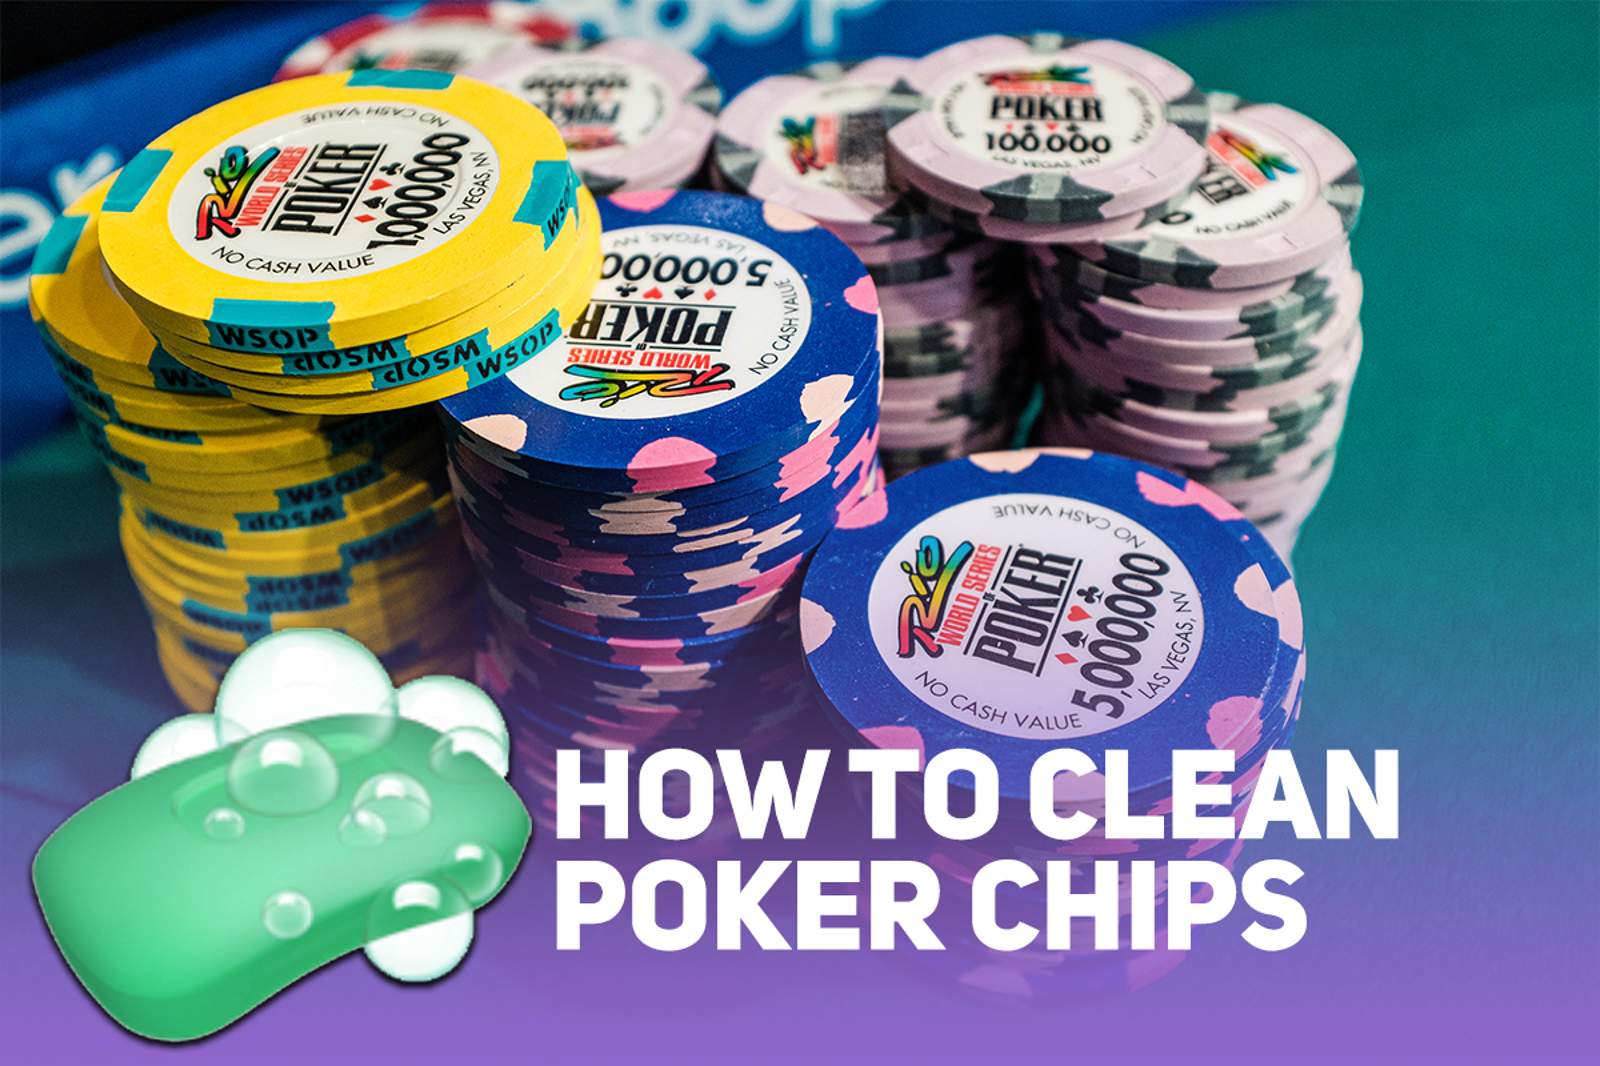 How to Clean Poker Chips